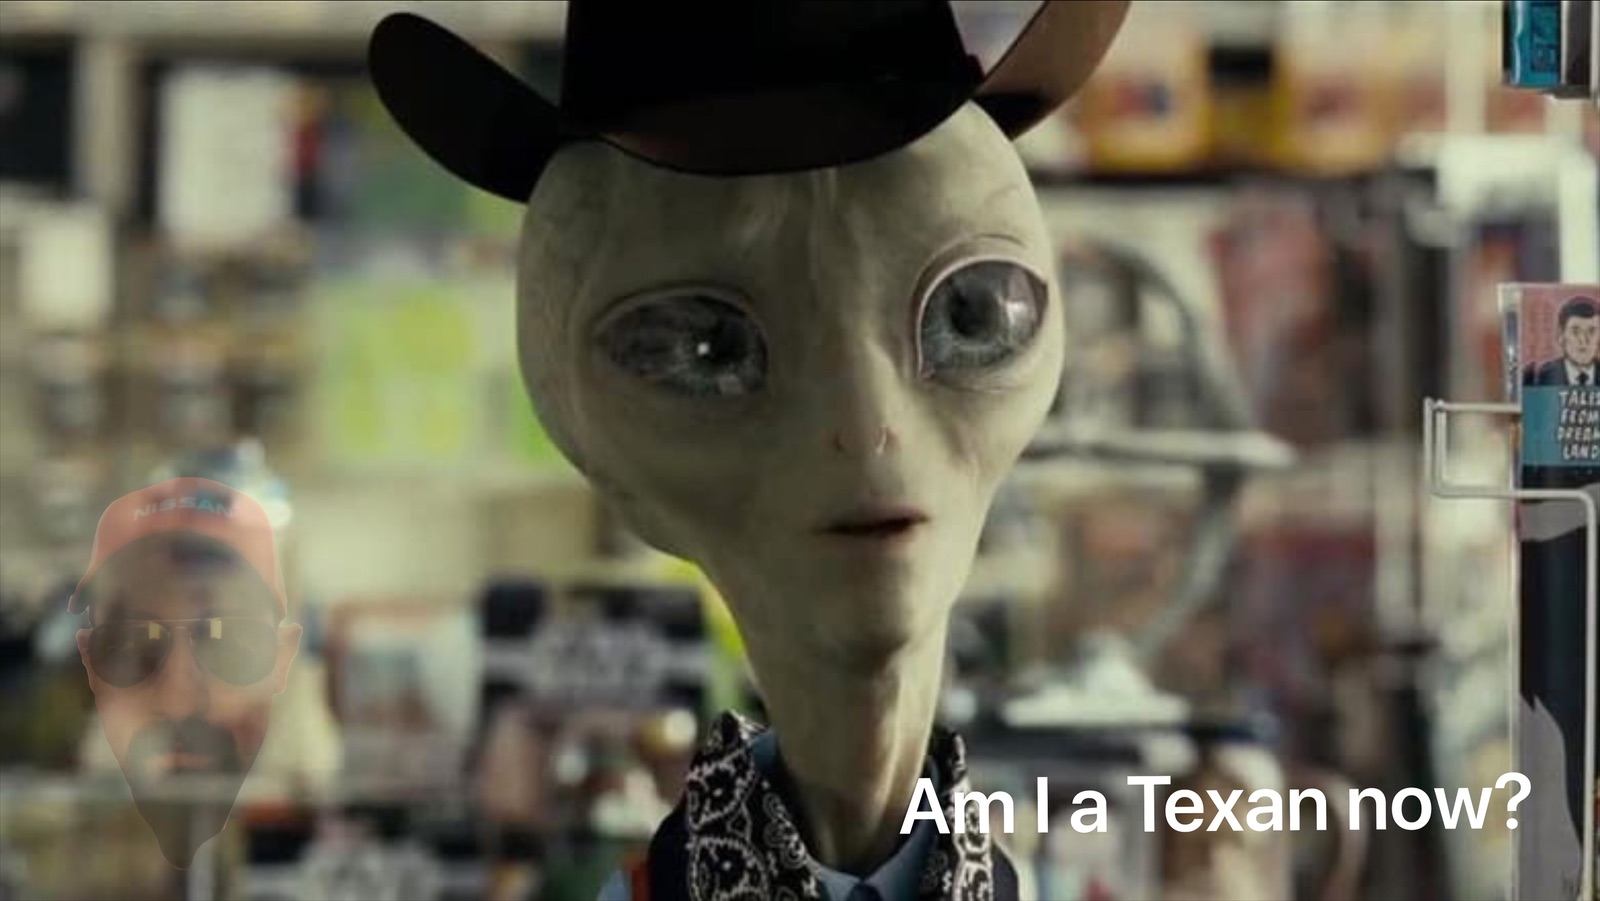 When I bring back my alien from Area 51 and make him an honorary Texan!